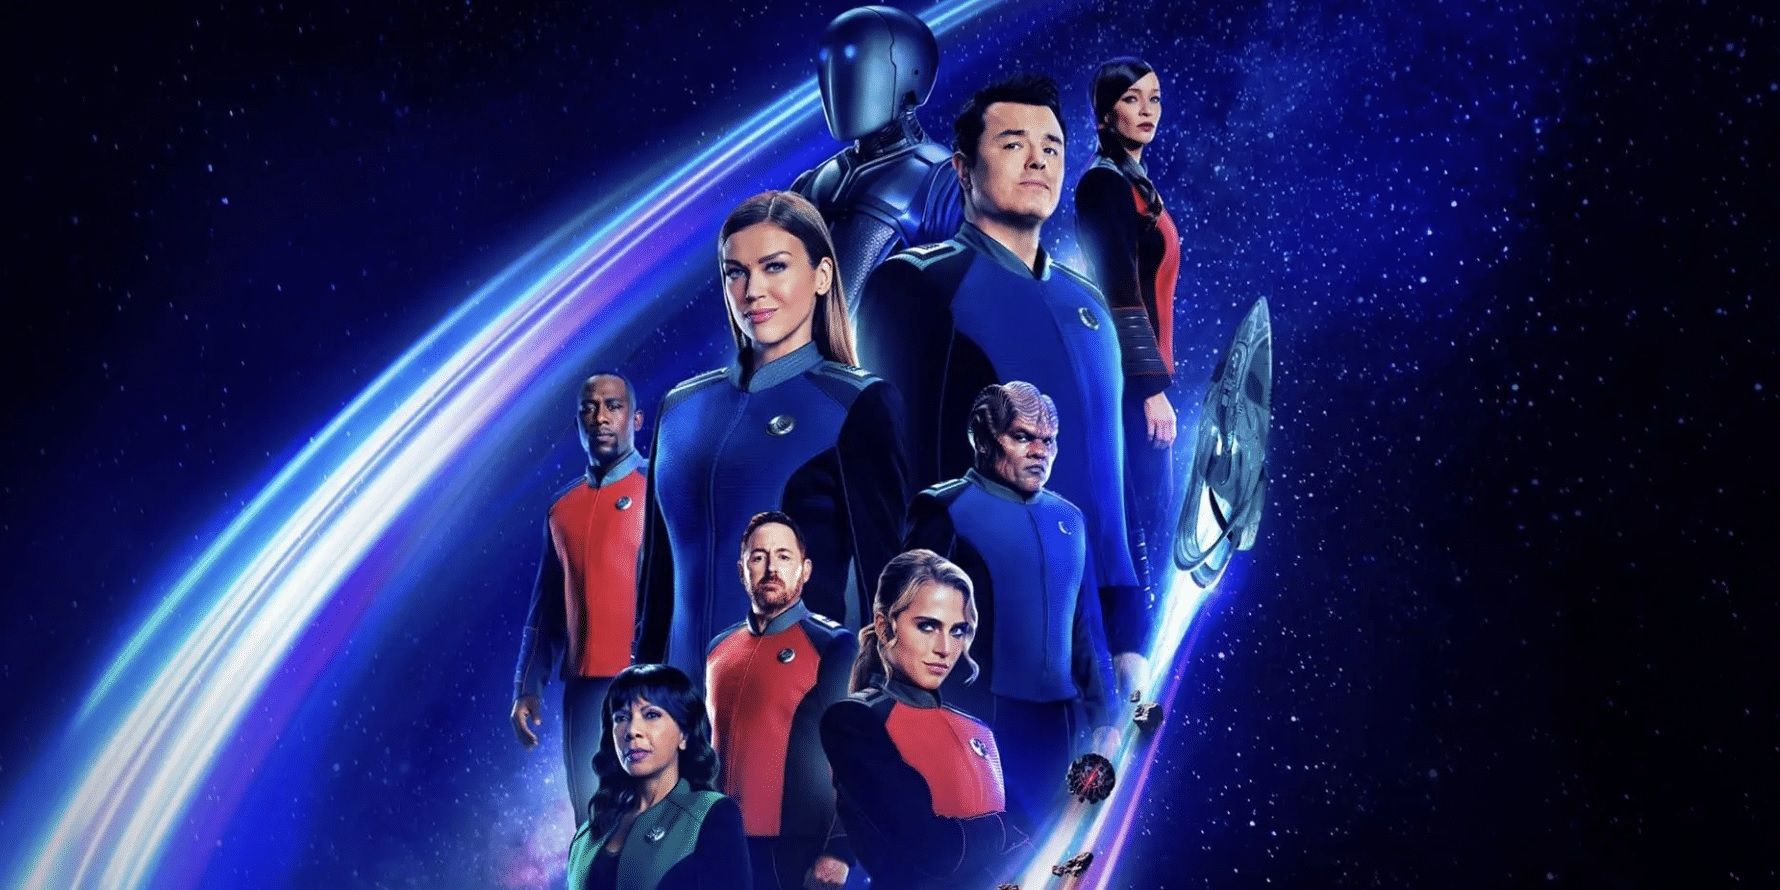 The poster for The Orville season 3